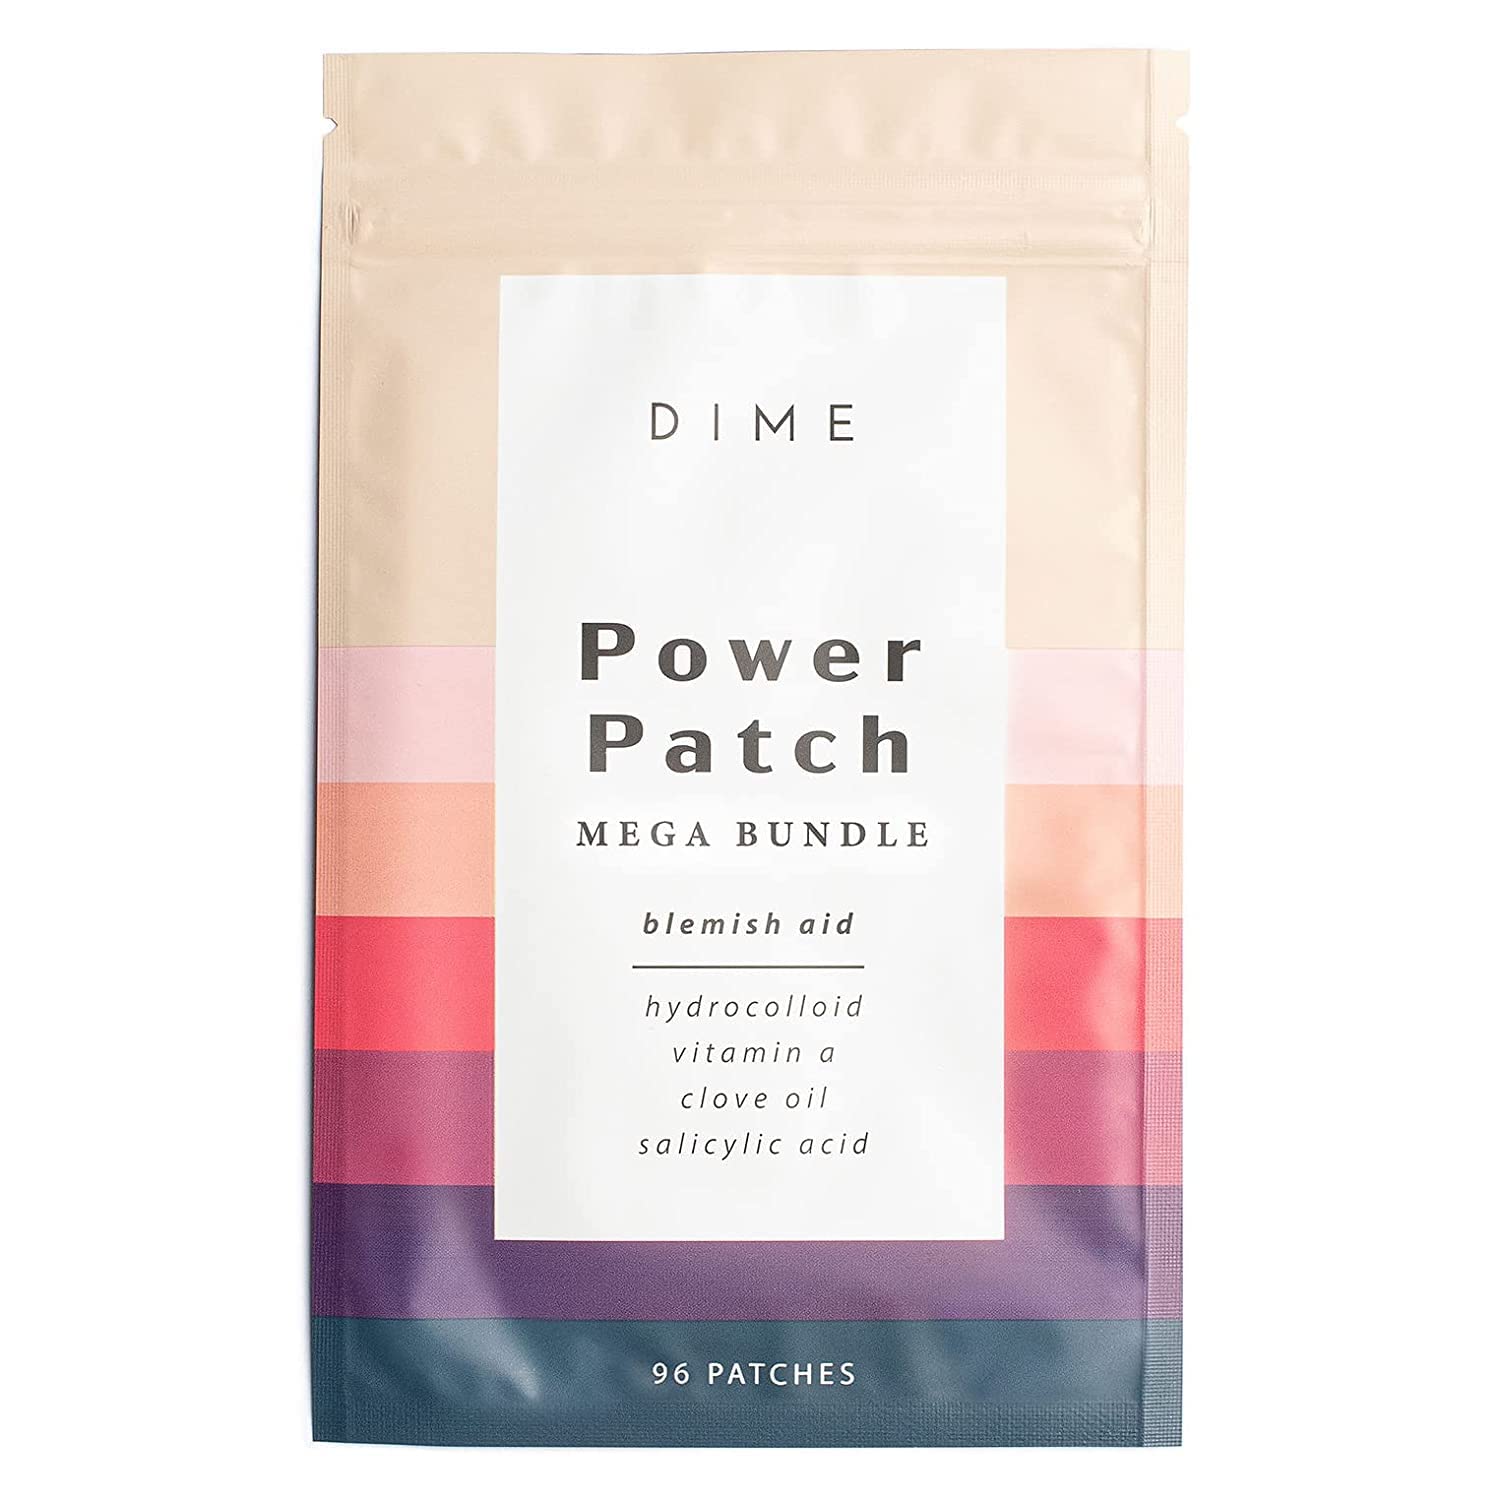 DIME Beauty Power Patch Acne Pimple Patch for Zits and Blemish Aid, Spot Treatment Patch for Face Acne with Salicylic Acid, Hydrocolloid, Vitamin A and Clove Oil, Vegan & Cruelty Free, 96 Count